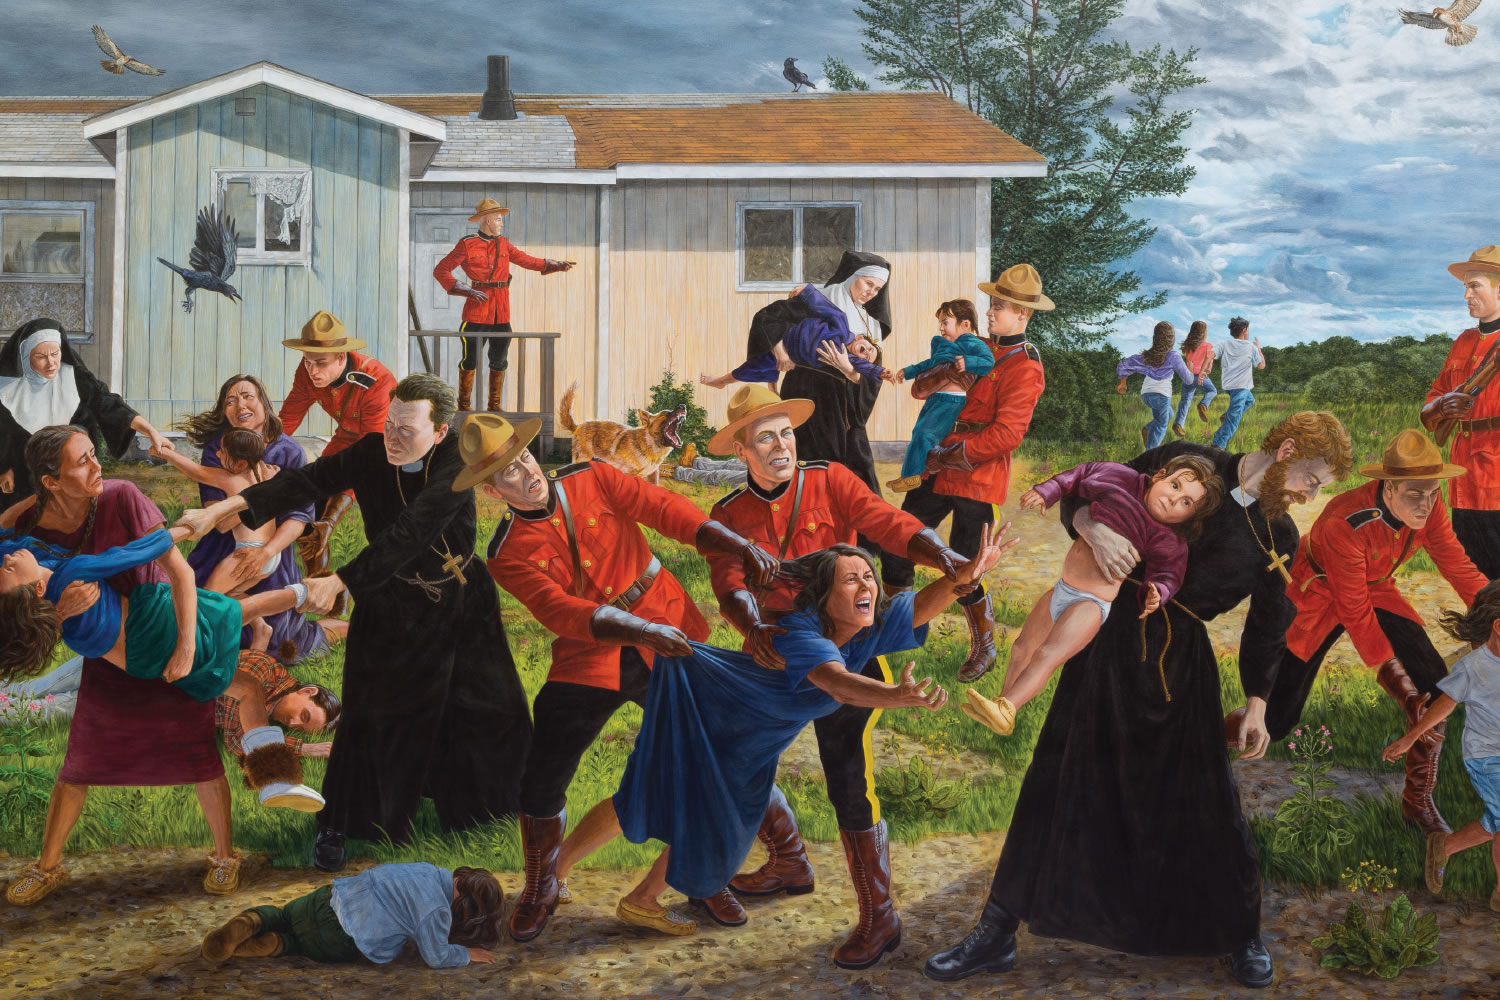 colourful Indigenous scene from 19th century depicting the catholic church separating young indigenous children from their parents and community